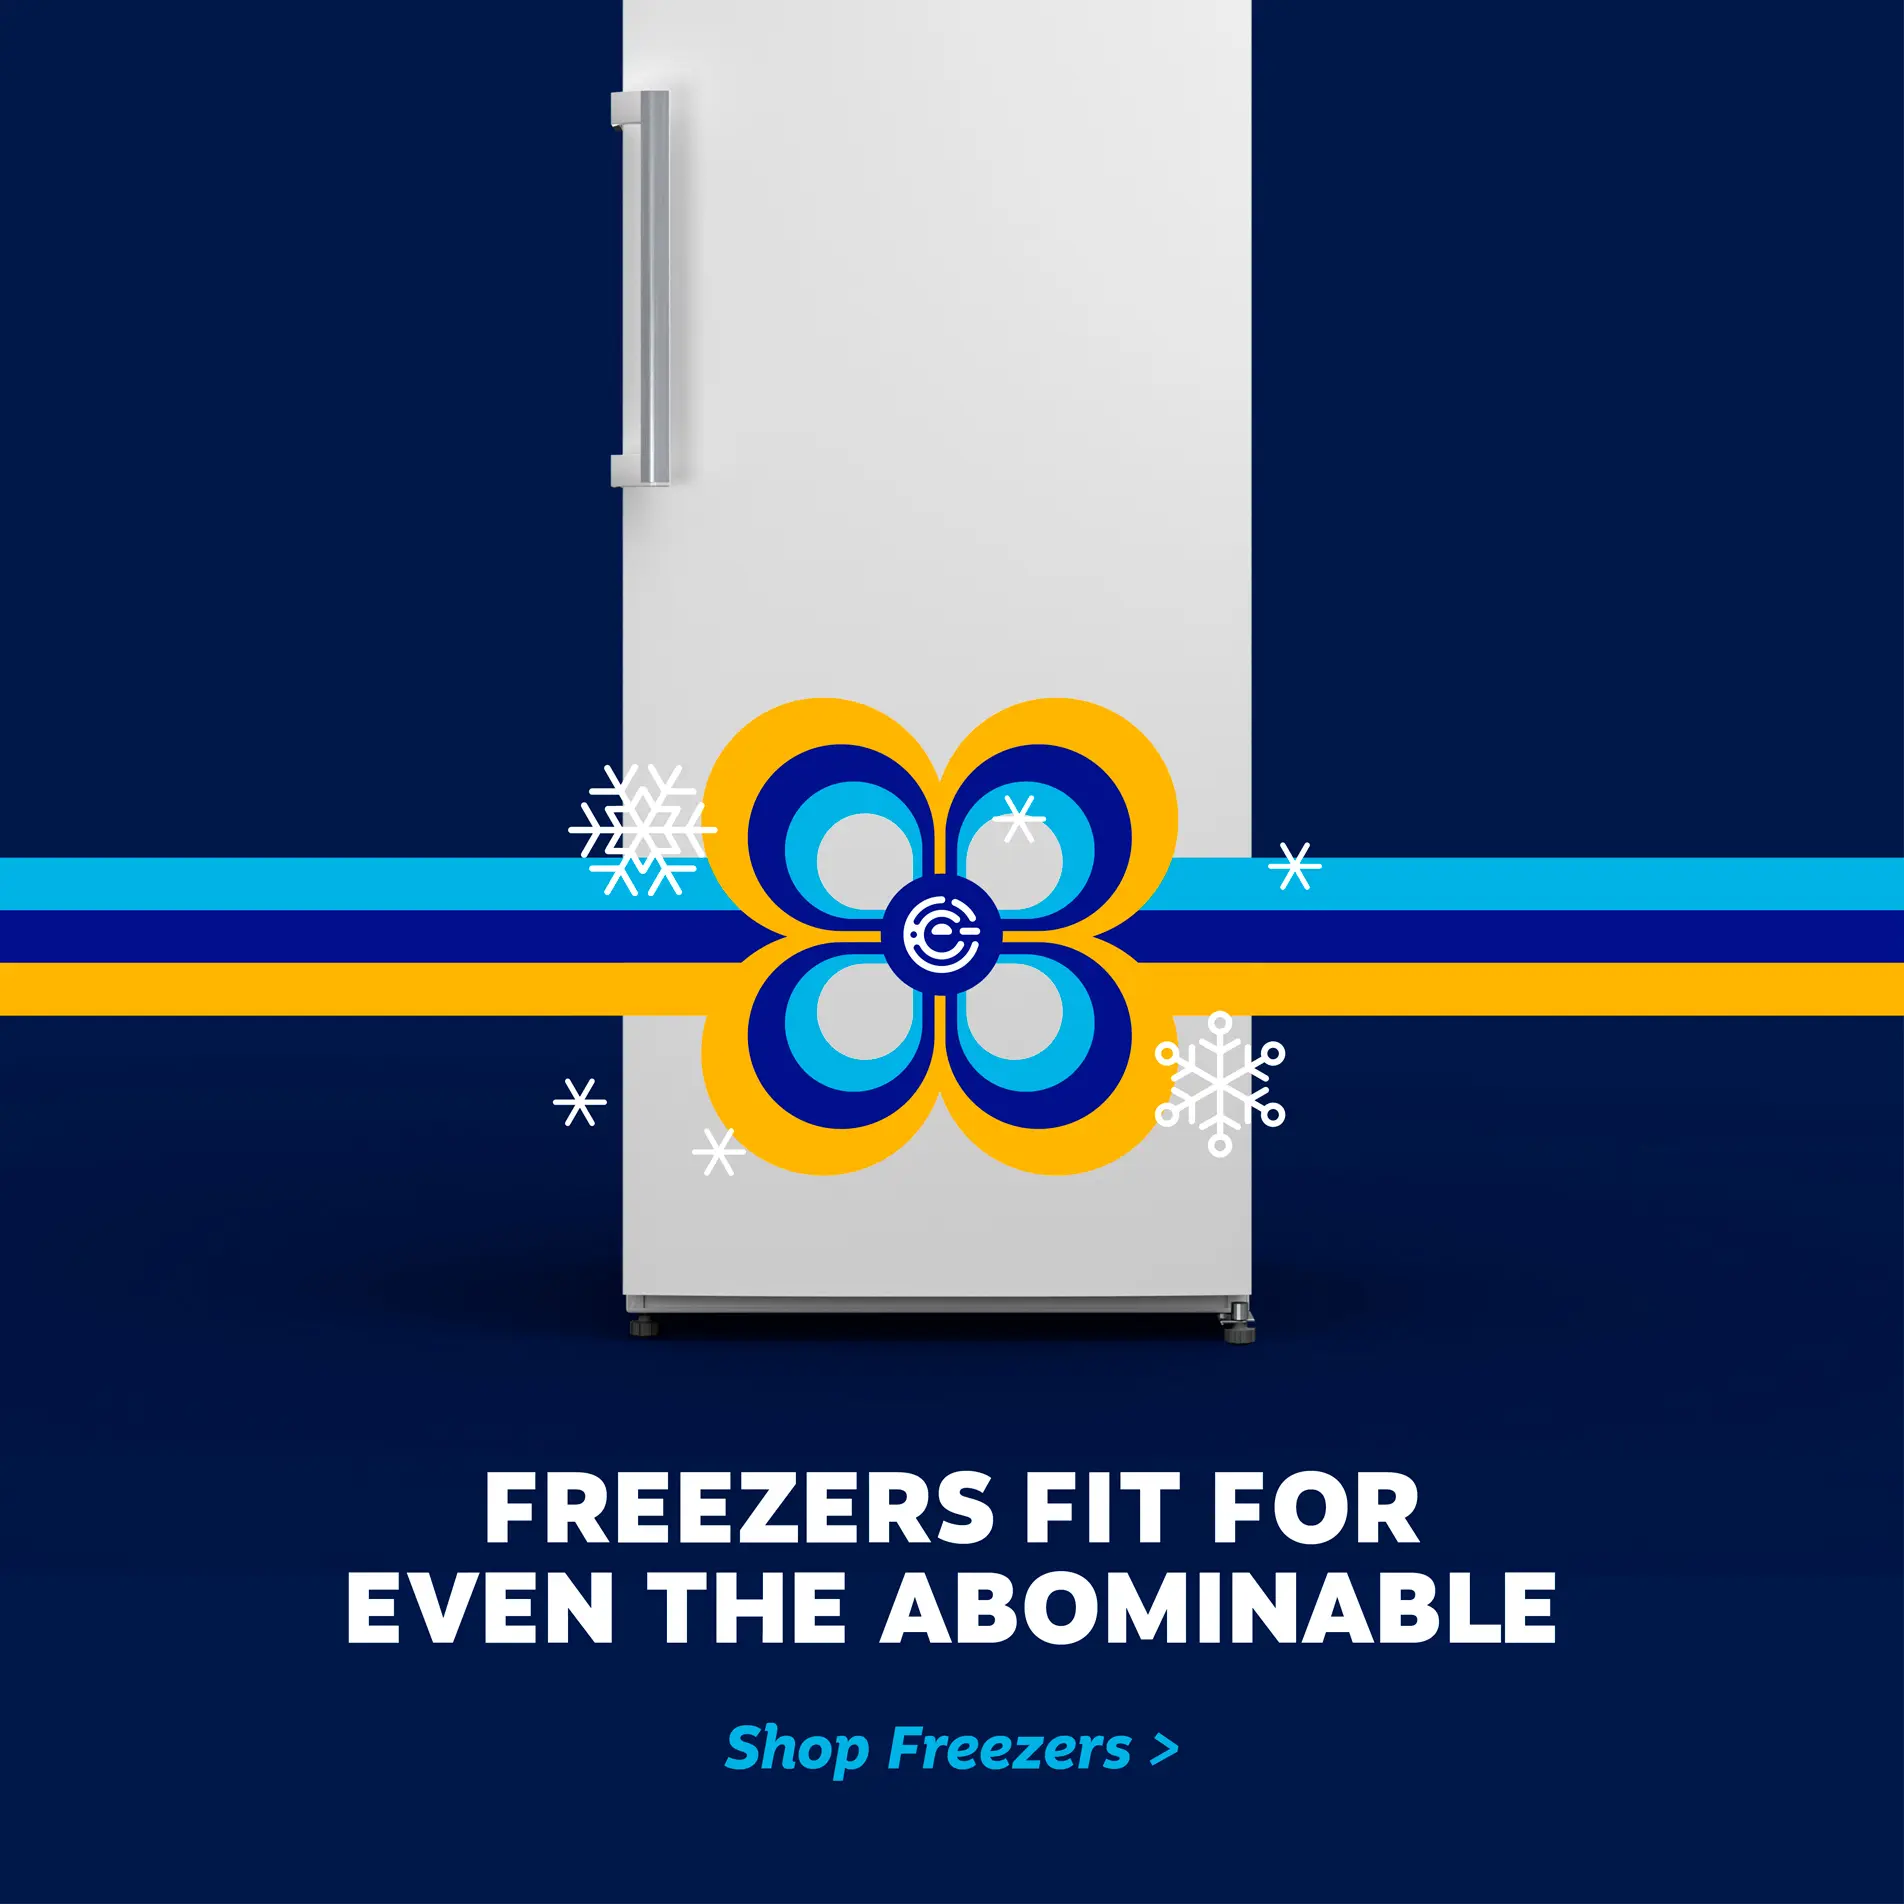 Freezers fit for even the abominable